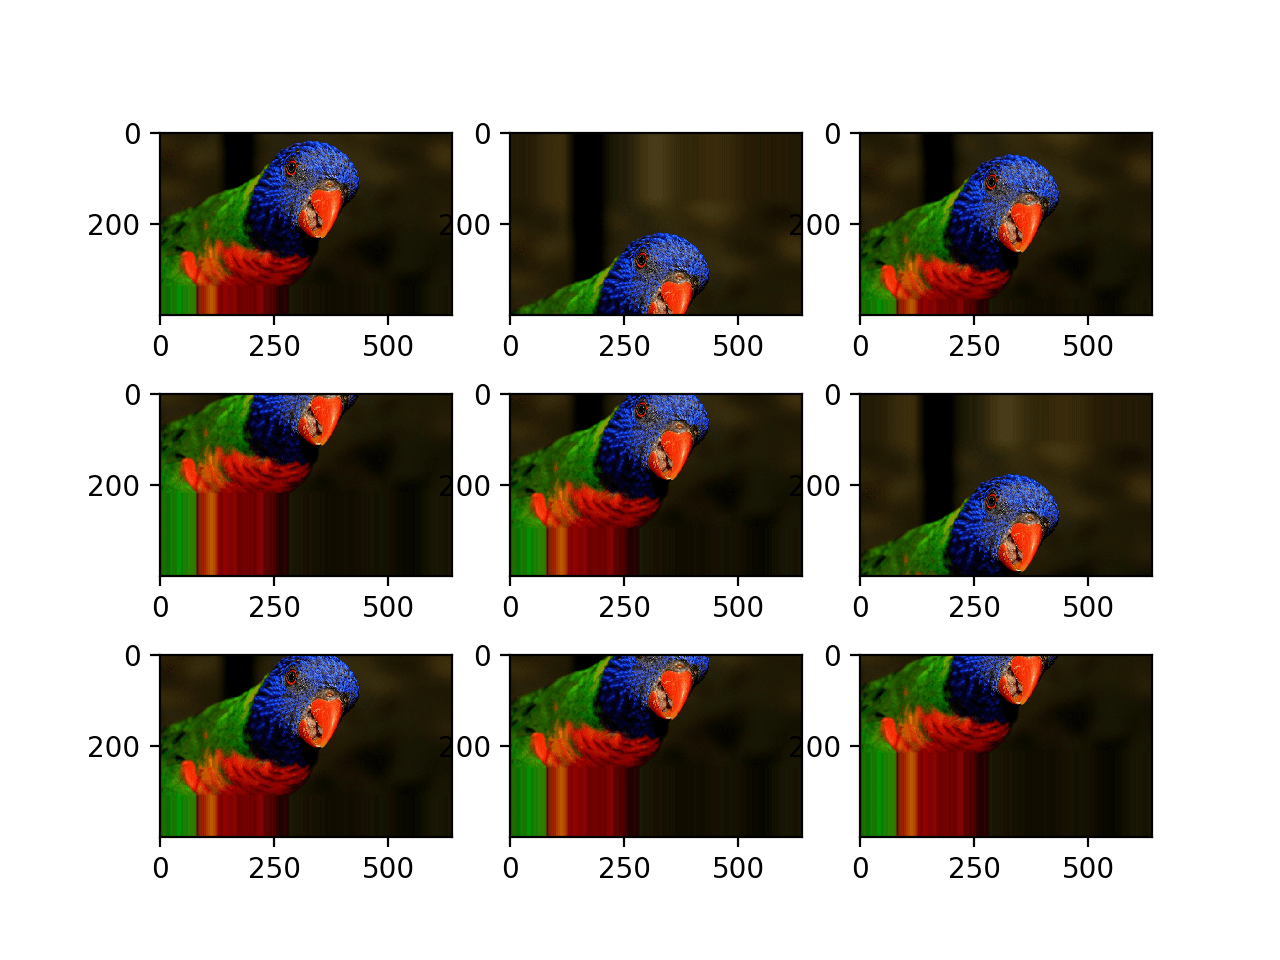 Plot of Augmented Images With a Random Vertical Shift